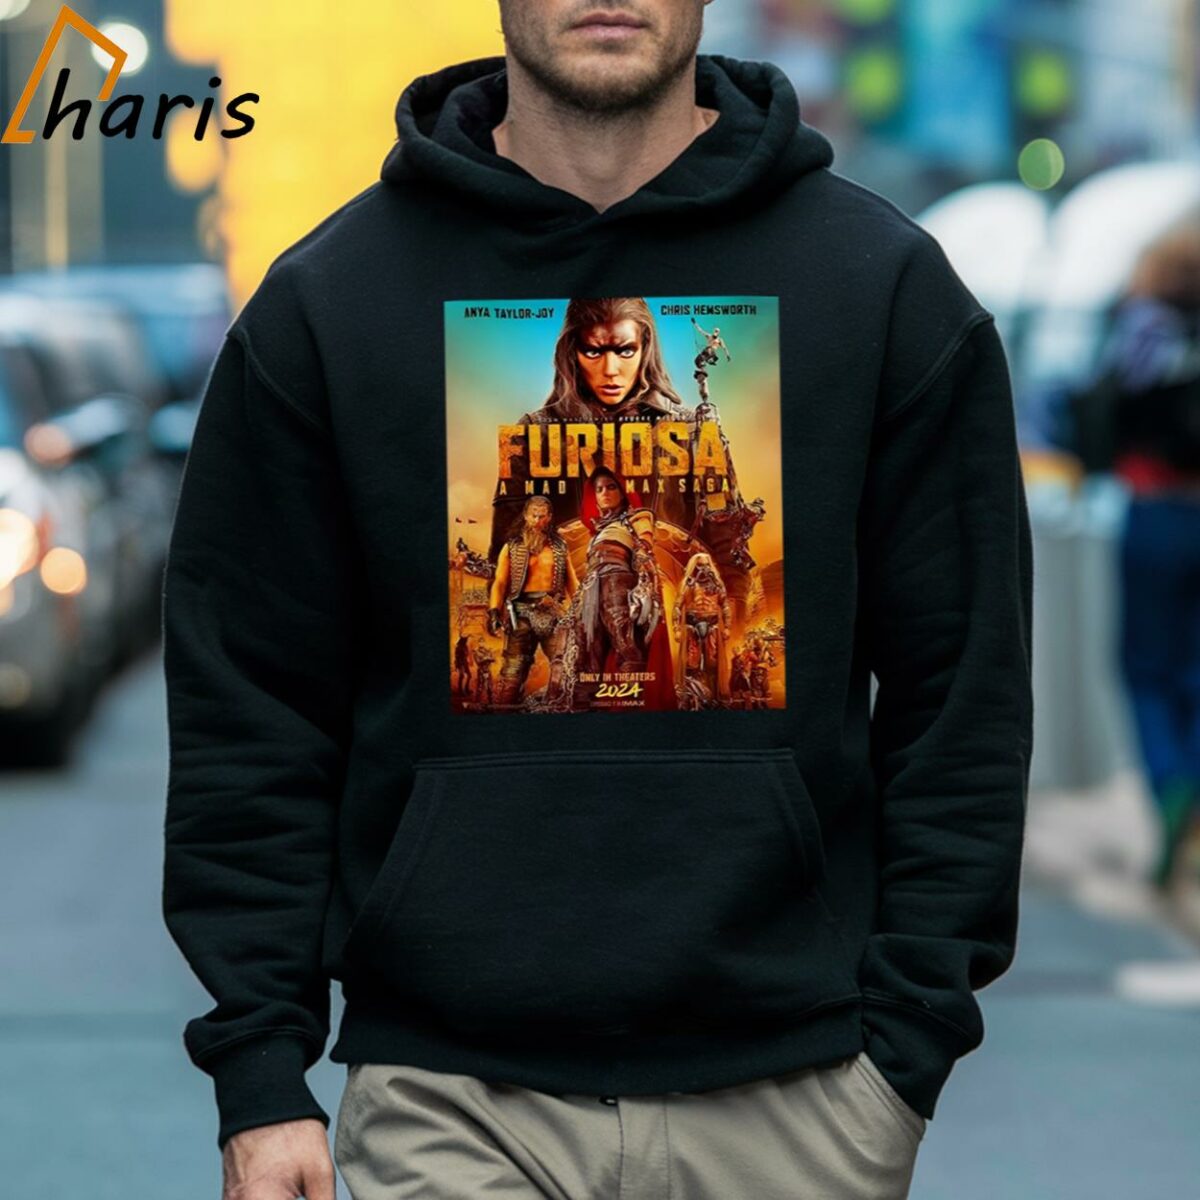 For Furiosa A Mad Max Saga In Theaters 2024 T shirt 5 Hoodie